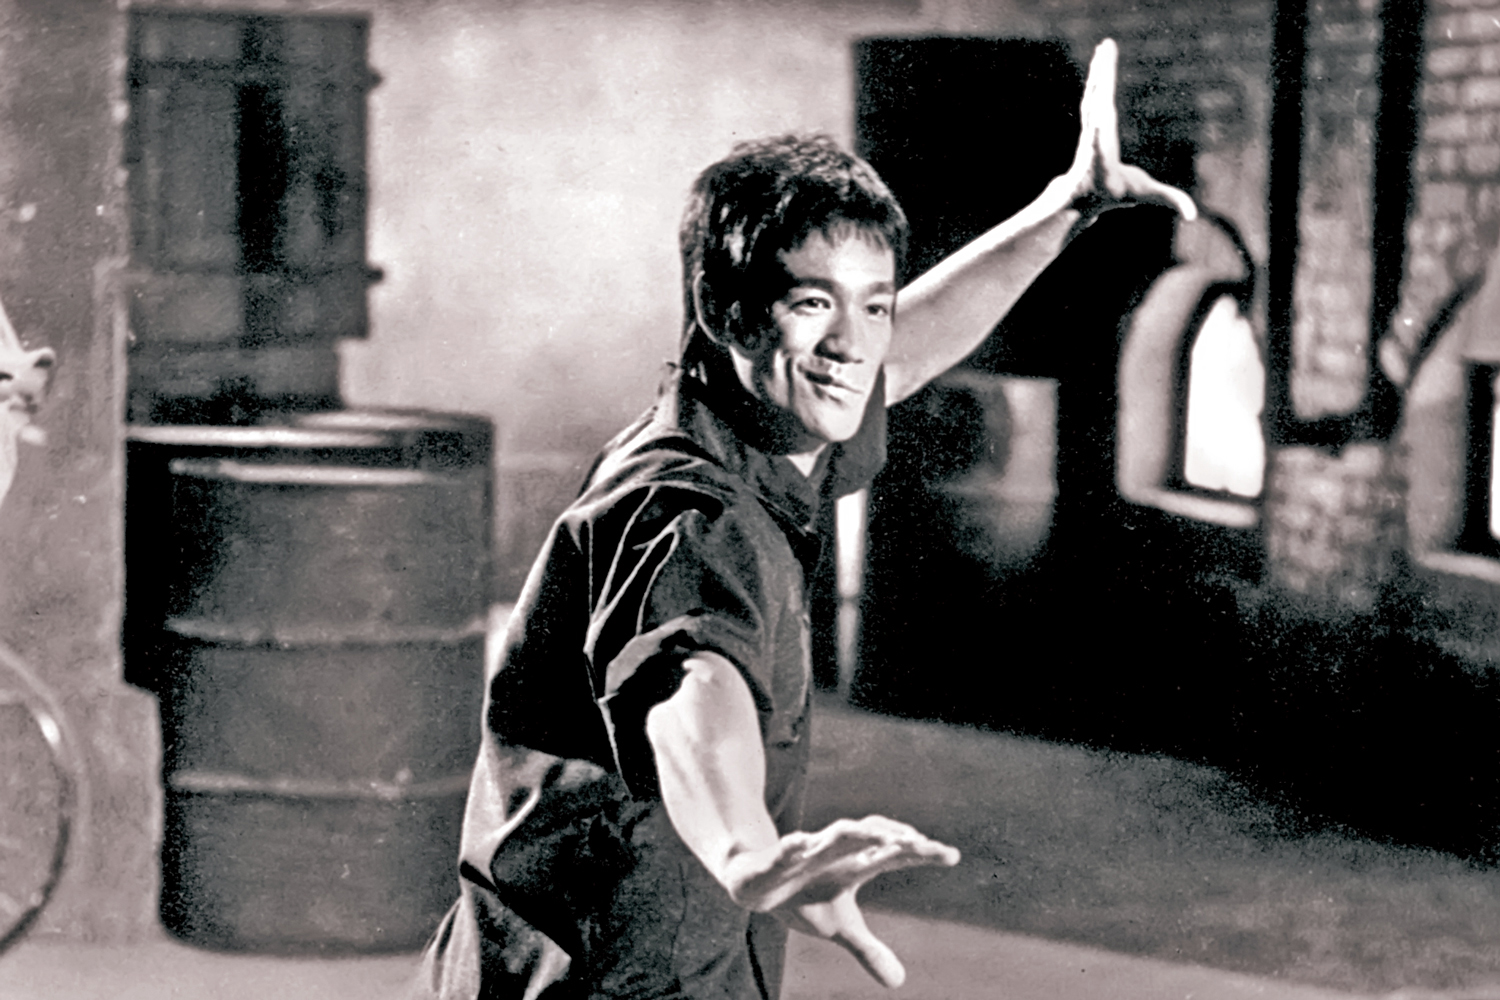 real bruce lee